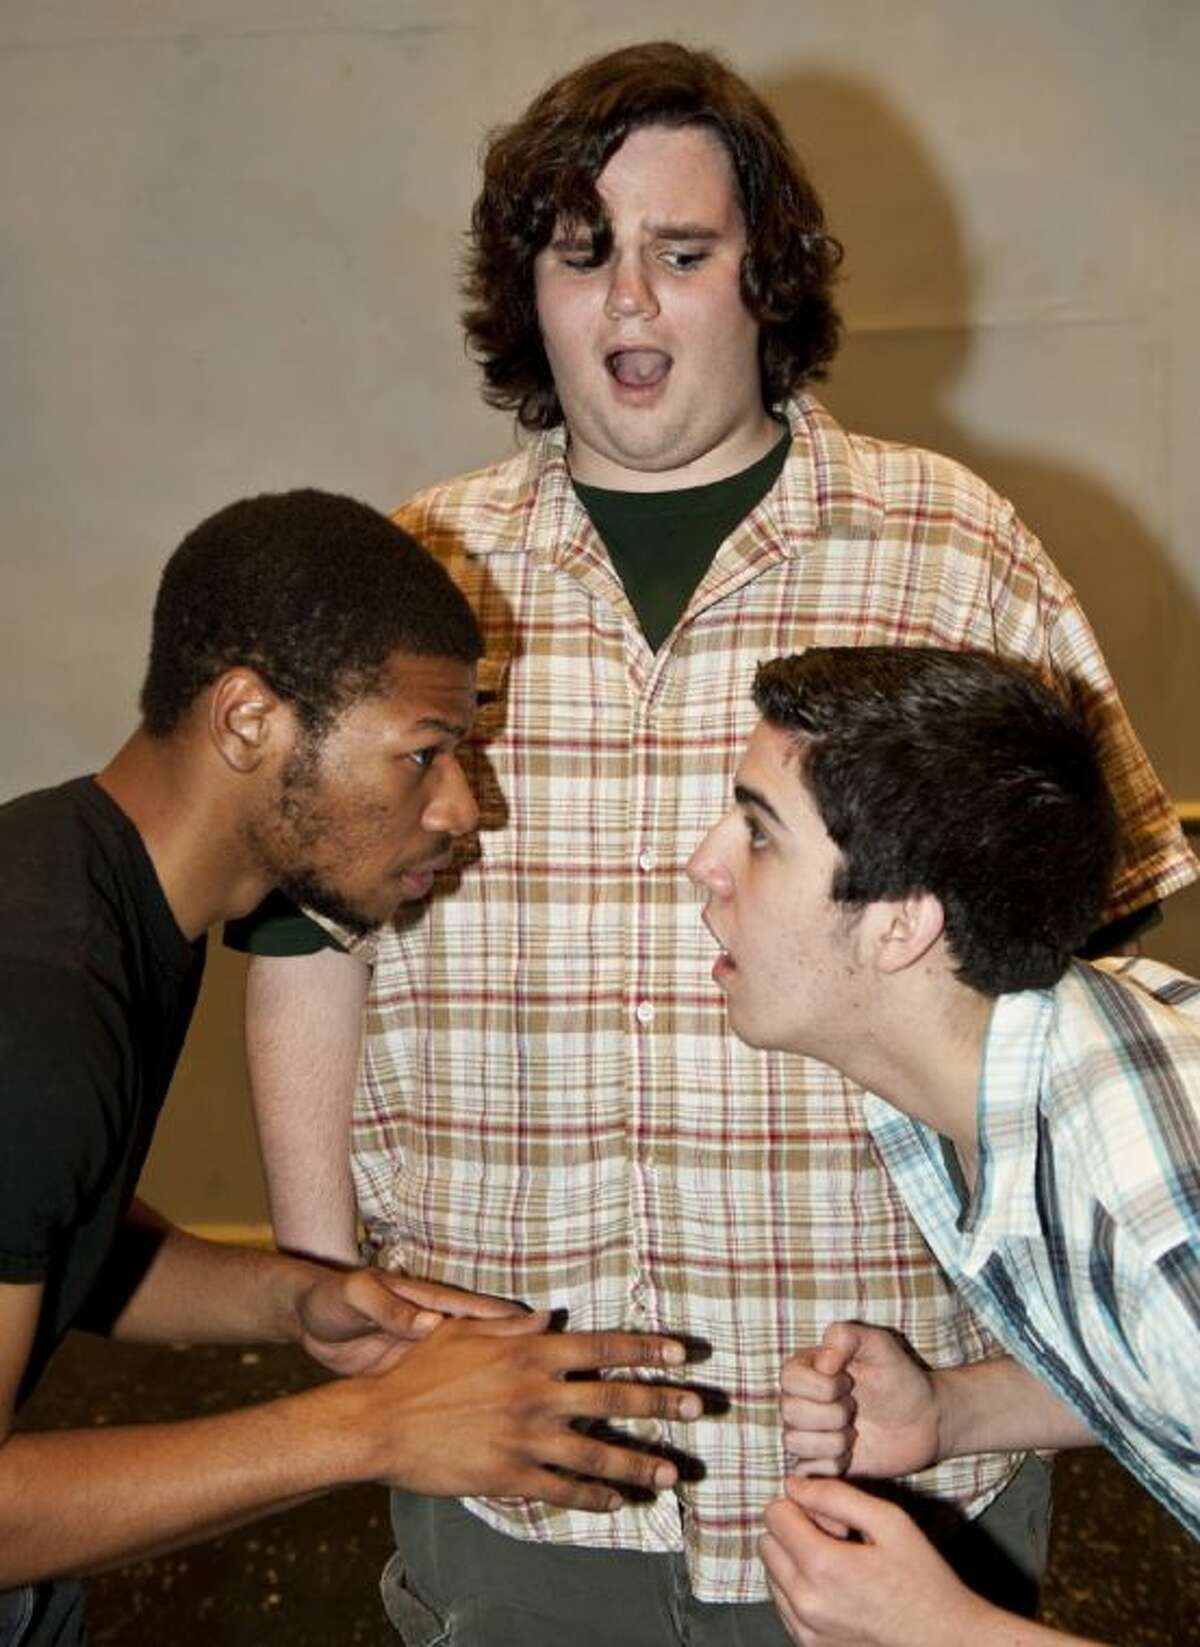 King Sextimus the Silent (left, Dillon Dewitt of Alvin) begins to tell his grown son, Prince Dauntless the Drab (right, Chase Folwell of Dickinson) about the birds and the bees, while the Court Jester (Sammie Ford of Dickinson) looks on in a rehearsal of Alvin Community College’s production of the lighthearted musical Once Upon a Mattress.